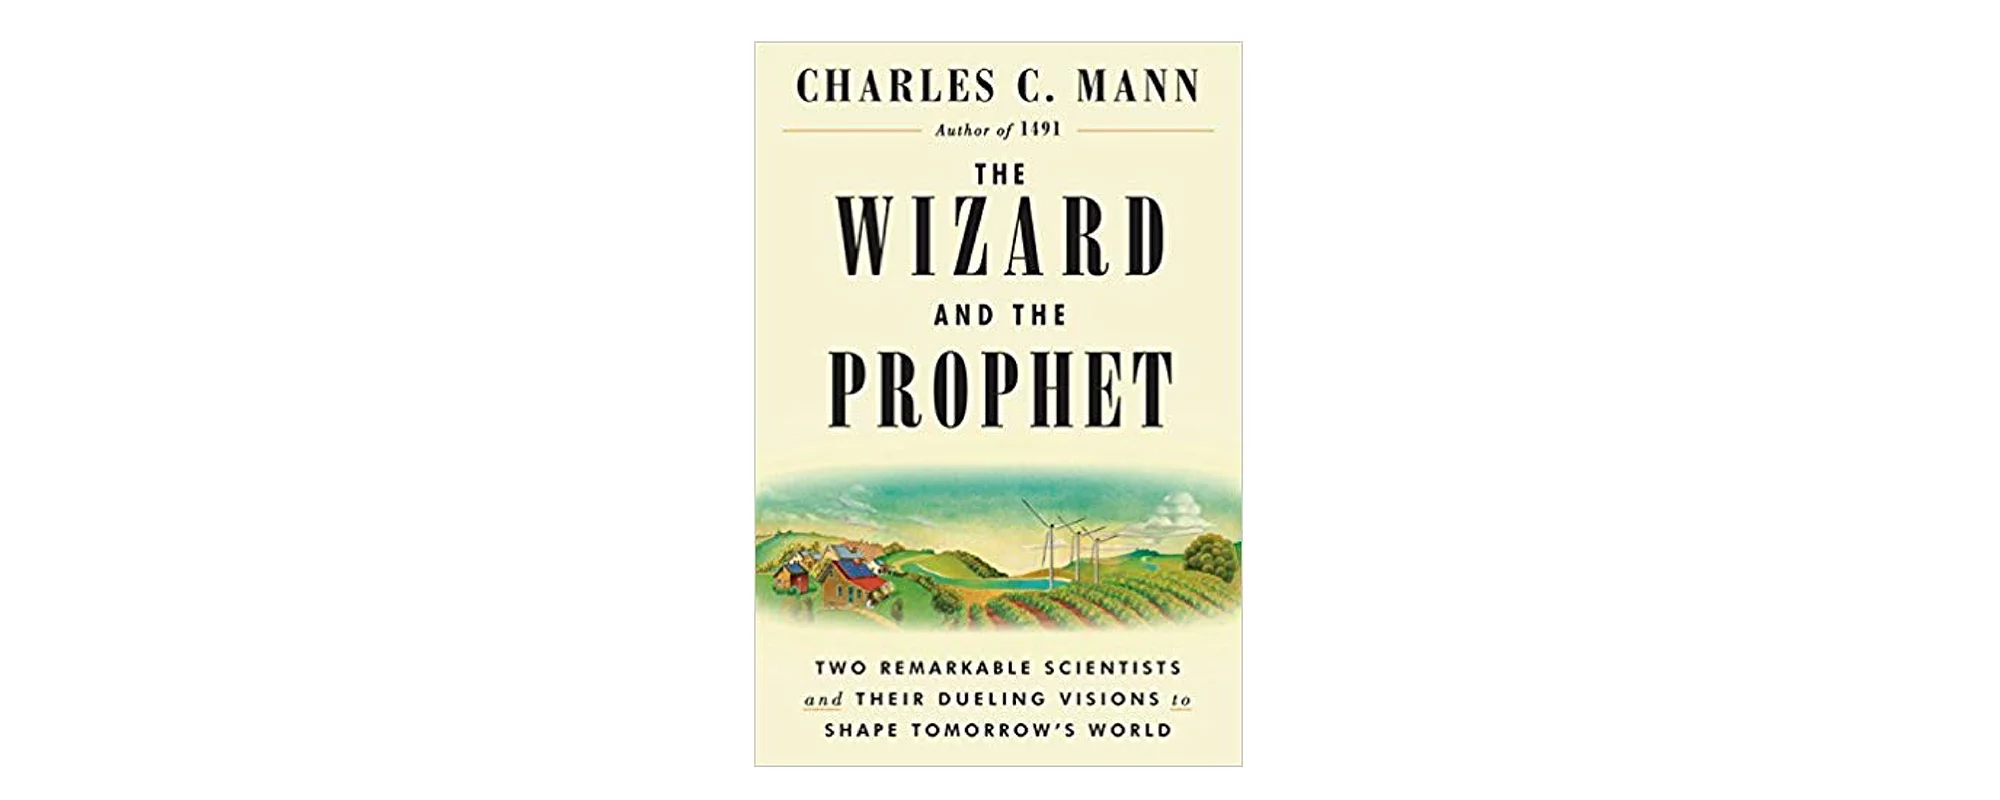 The Wizard and the Prophet: Two Remarkable Scientists and Their Dueling Visions to Shape Tomorrow’s World by Charles Mann